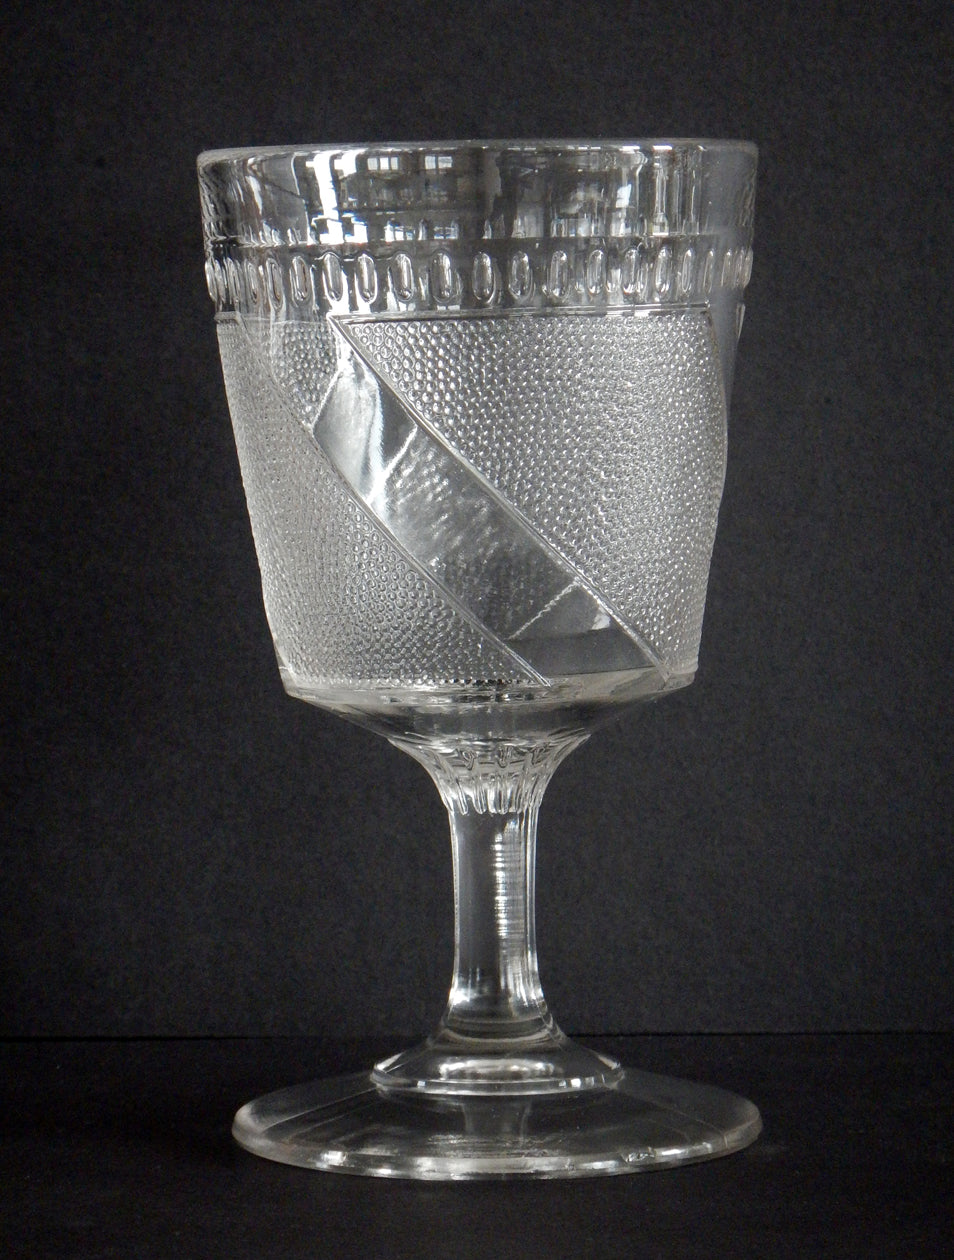 Clear Diagonal Band Pattern Pressed Glass Goblet full view image 2